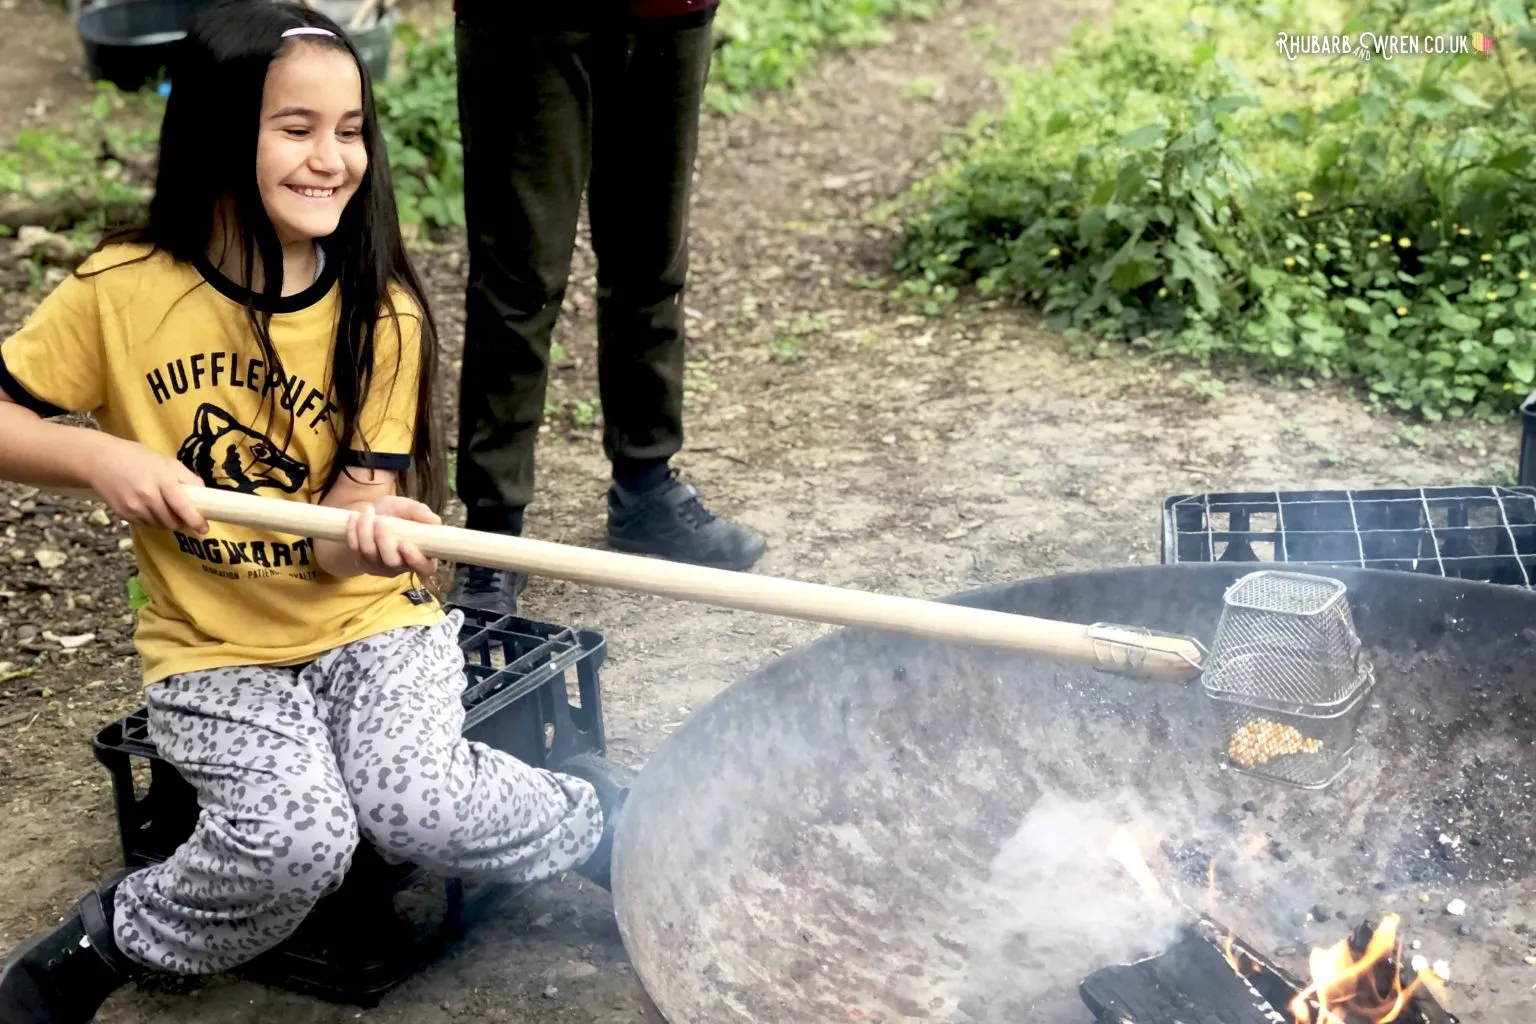 Girl cooking popcorn over a campfire using a cage on a stick